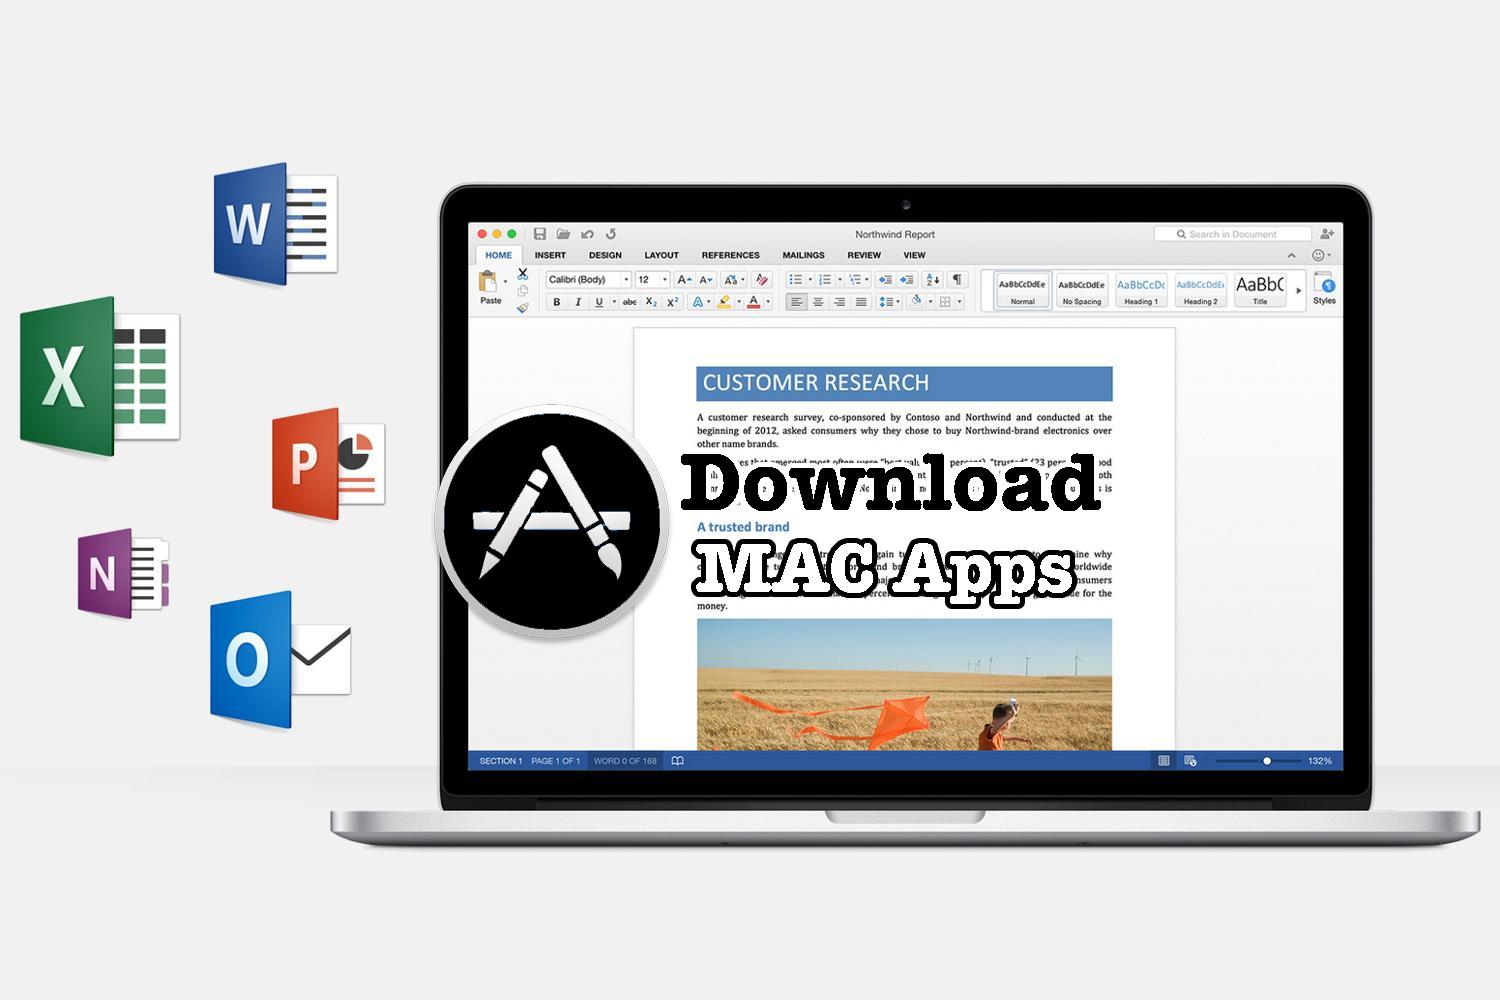 ms office for mac torrent download